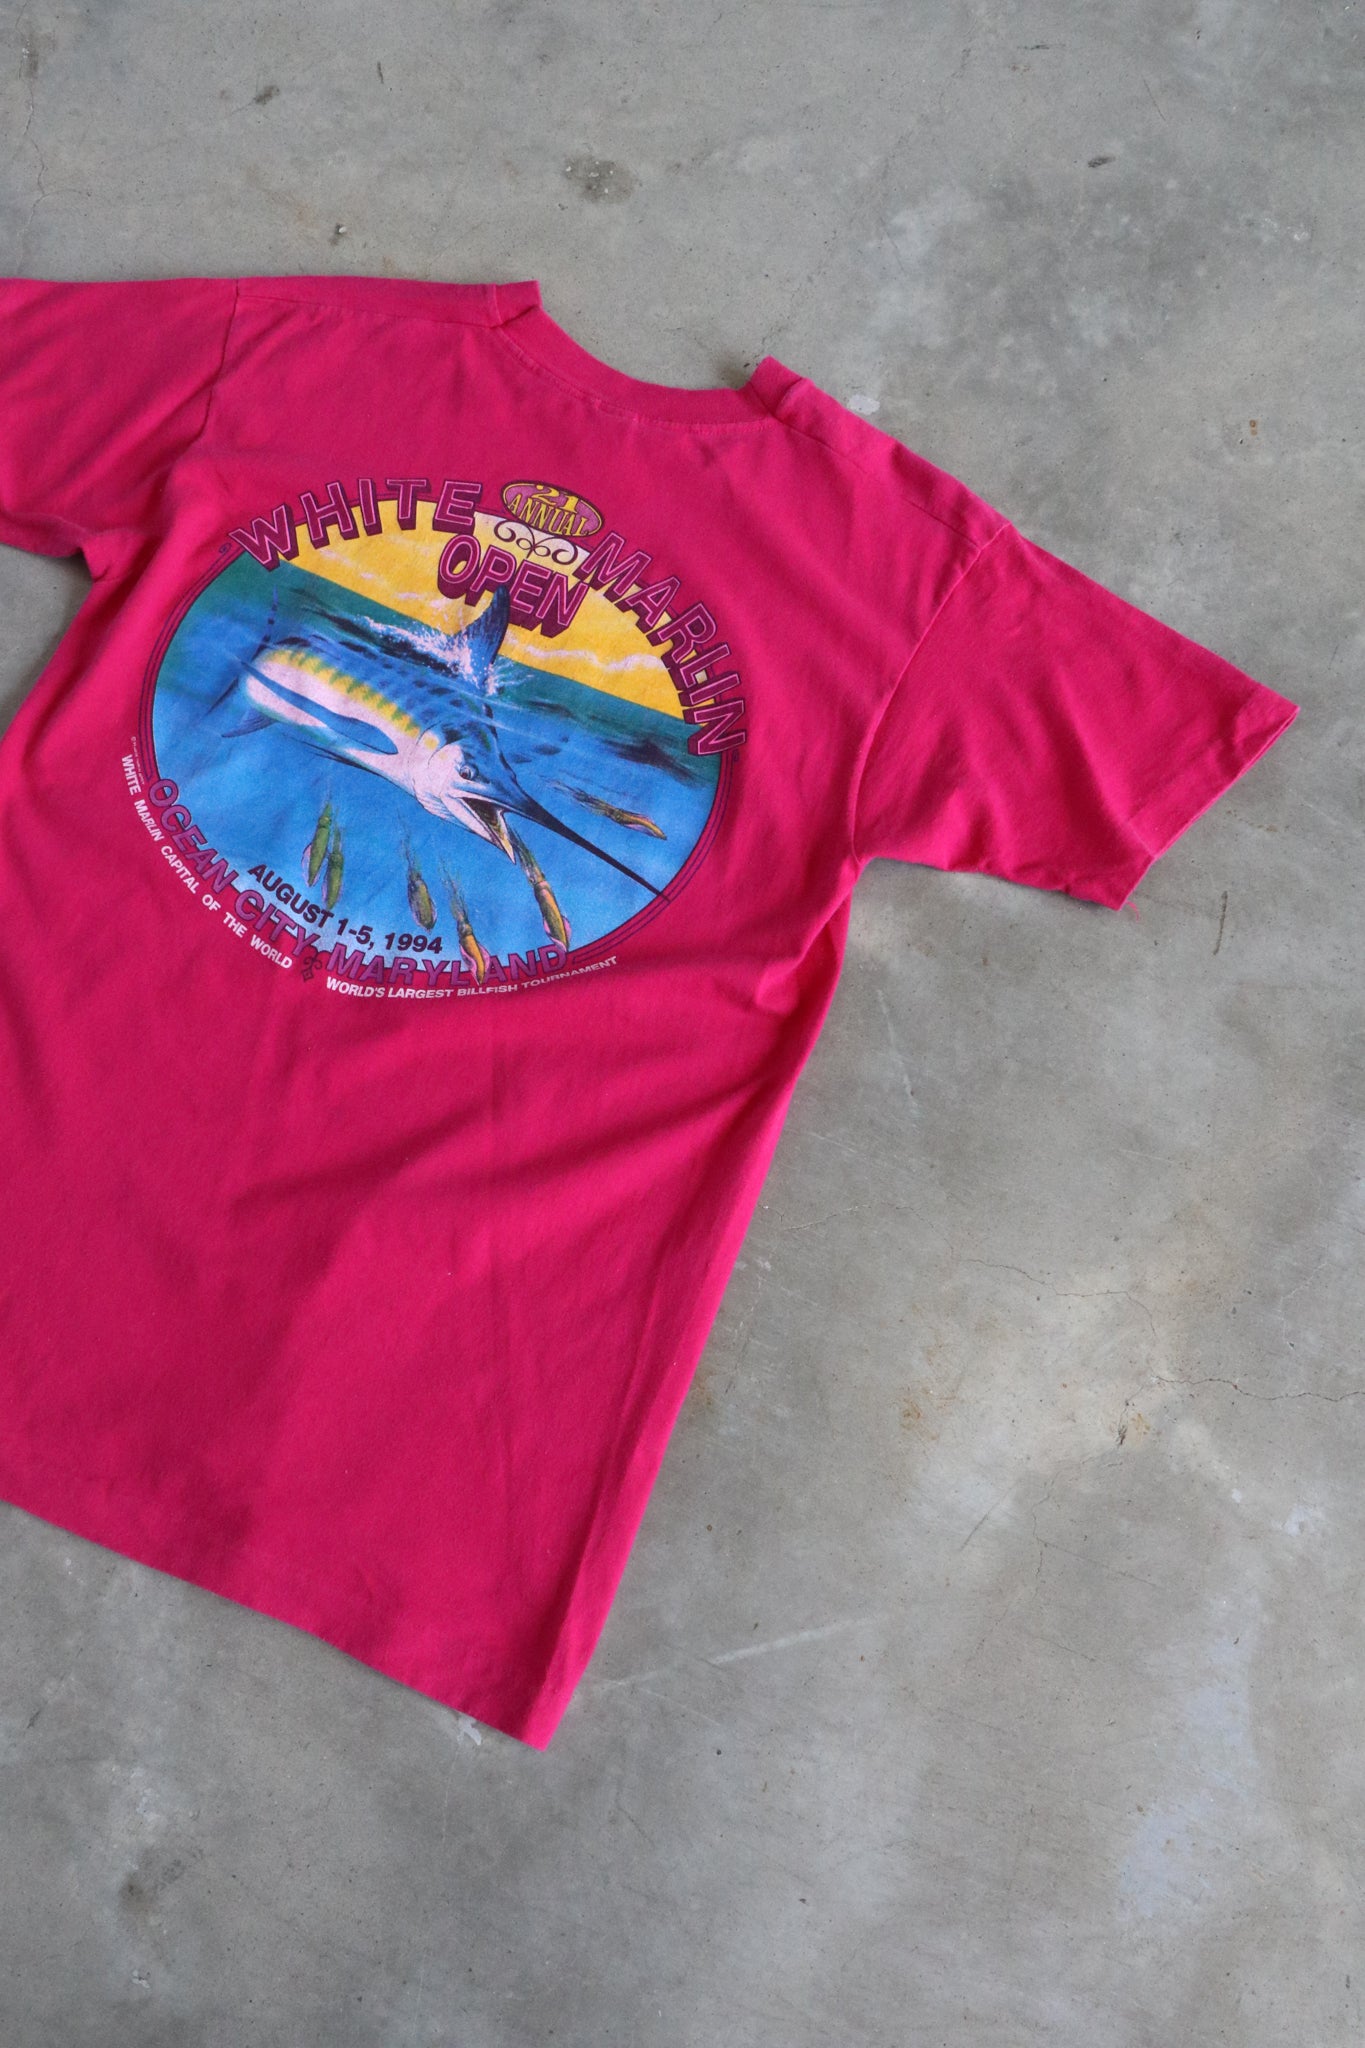 Vintage 1994 White Marlin Open Tee Large